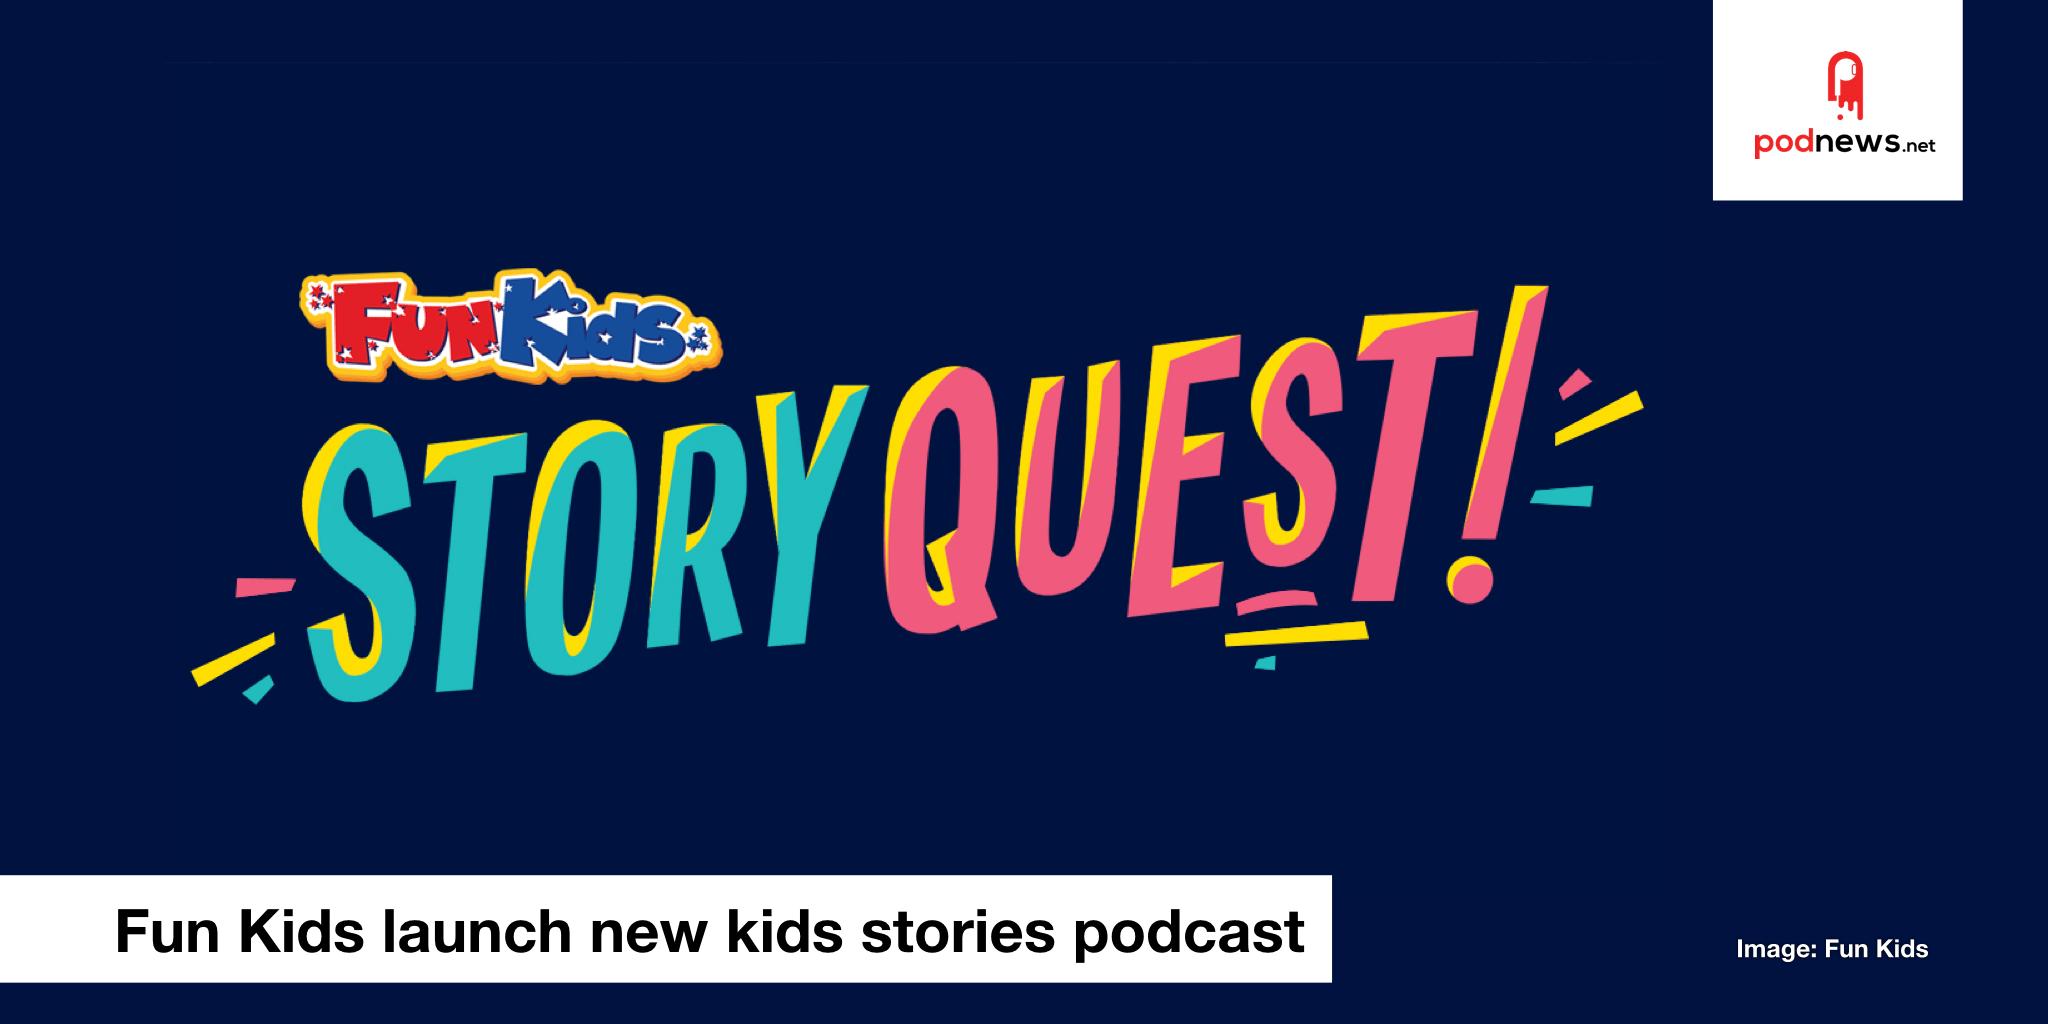 Fun Kids Launches A New Story Podcast